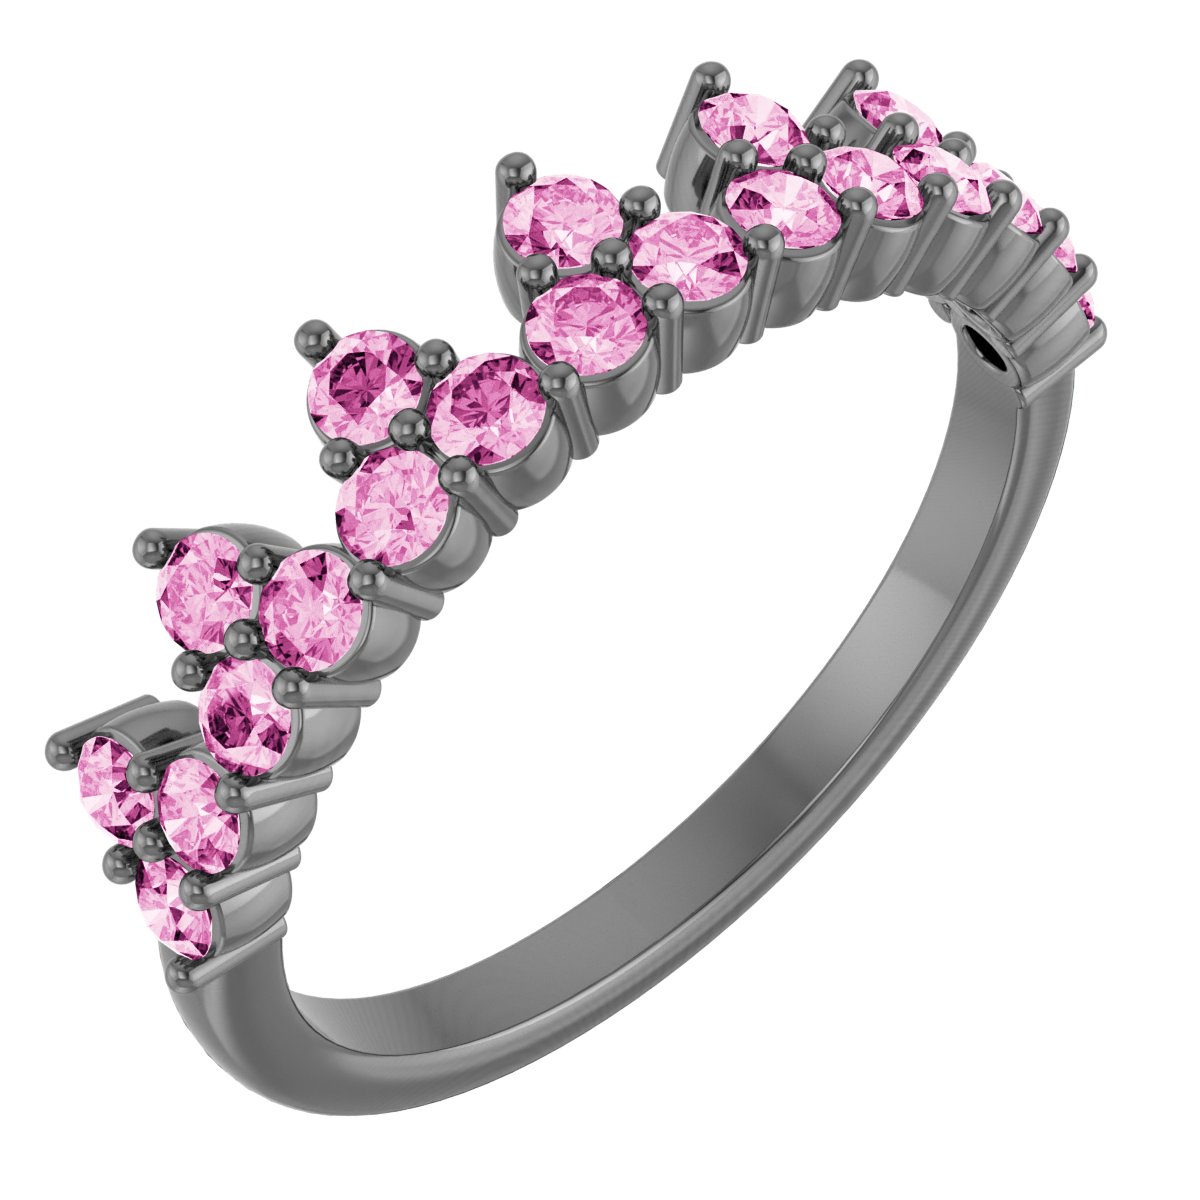 14K Yellow Natural Pink Sapphire Crown Ring